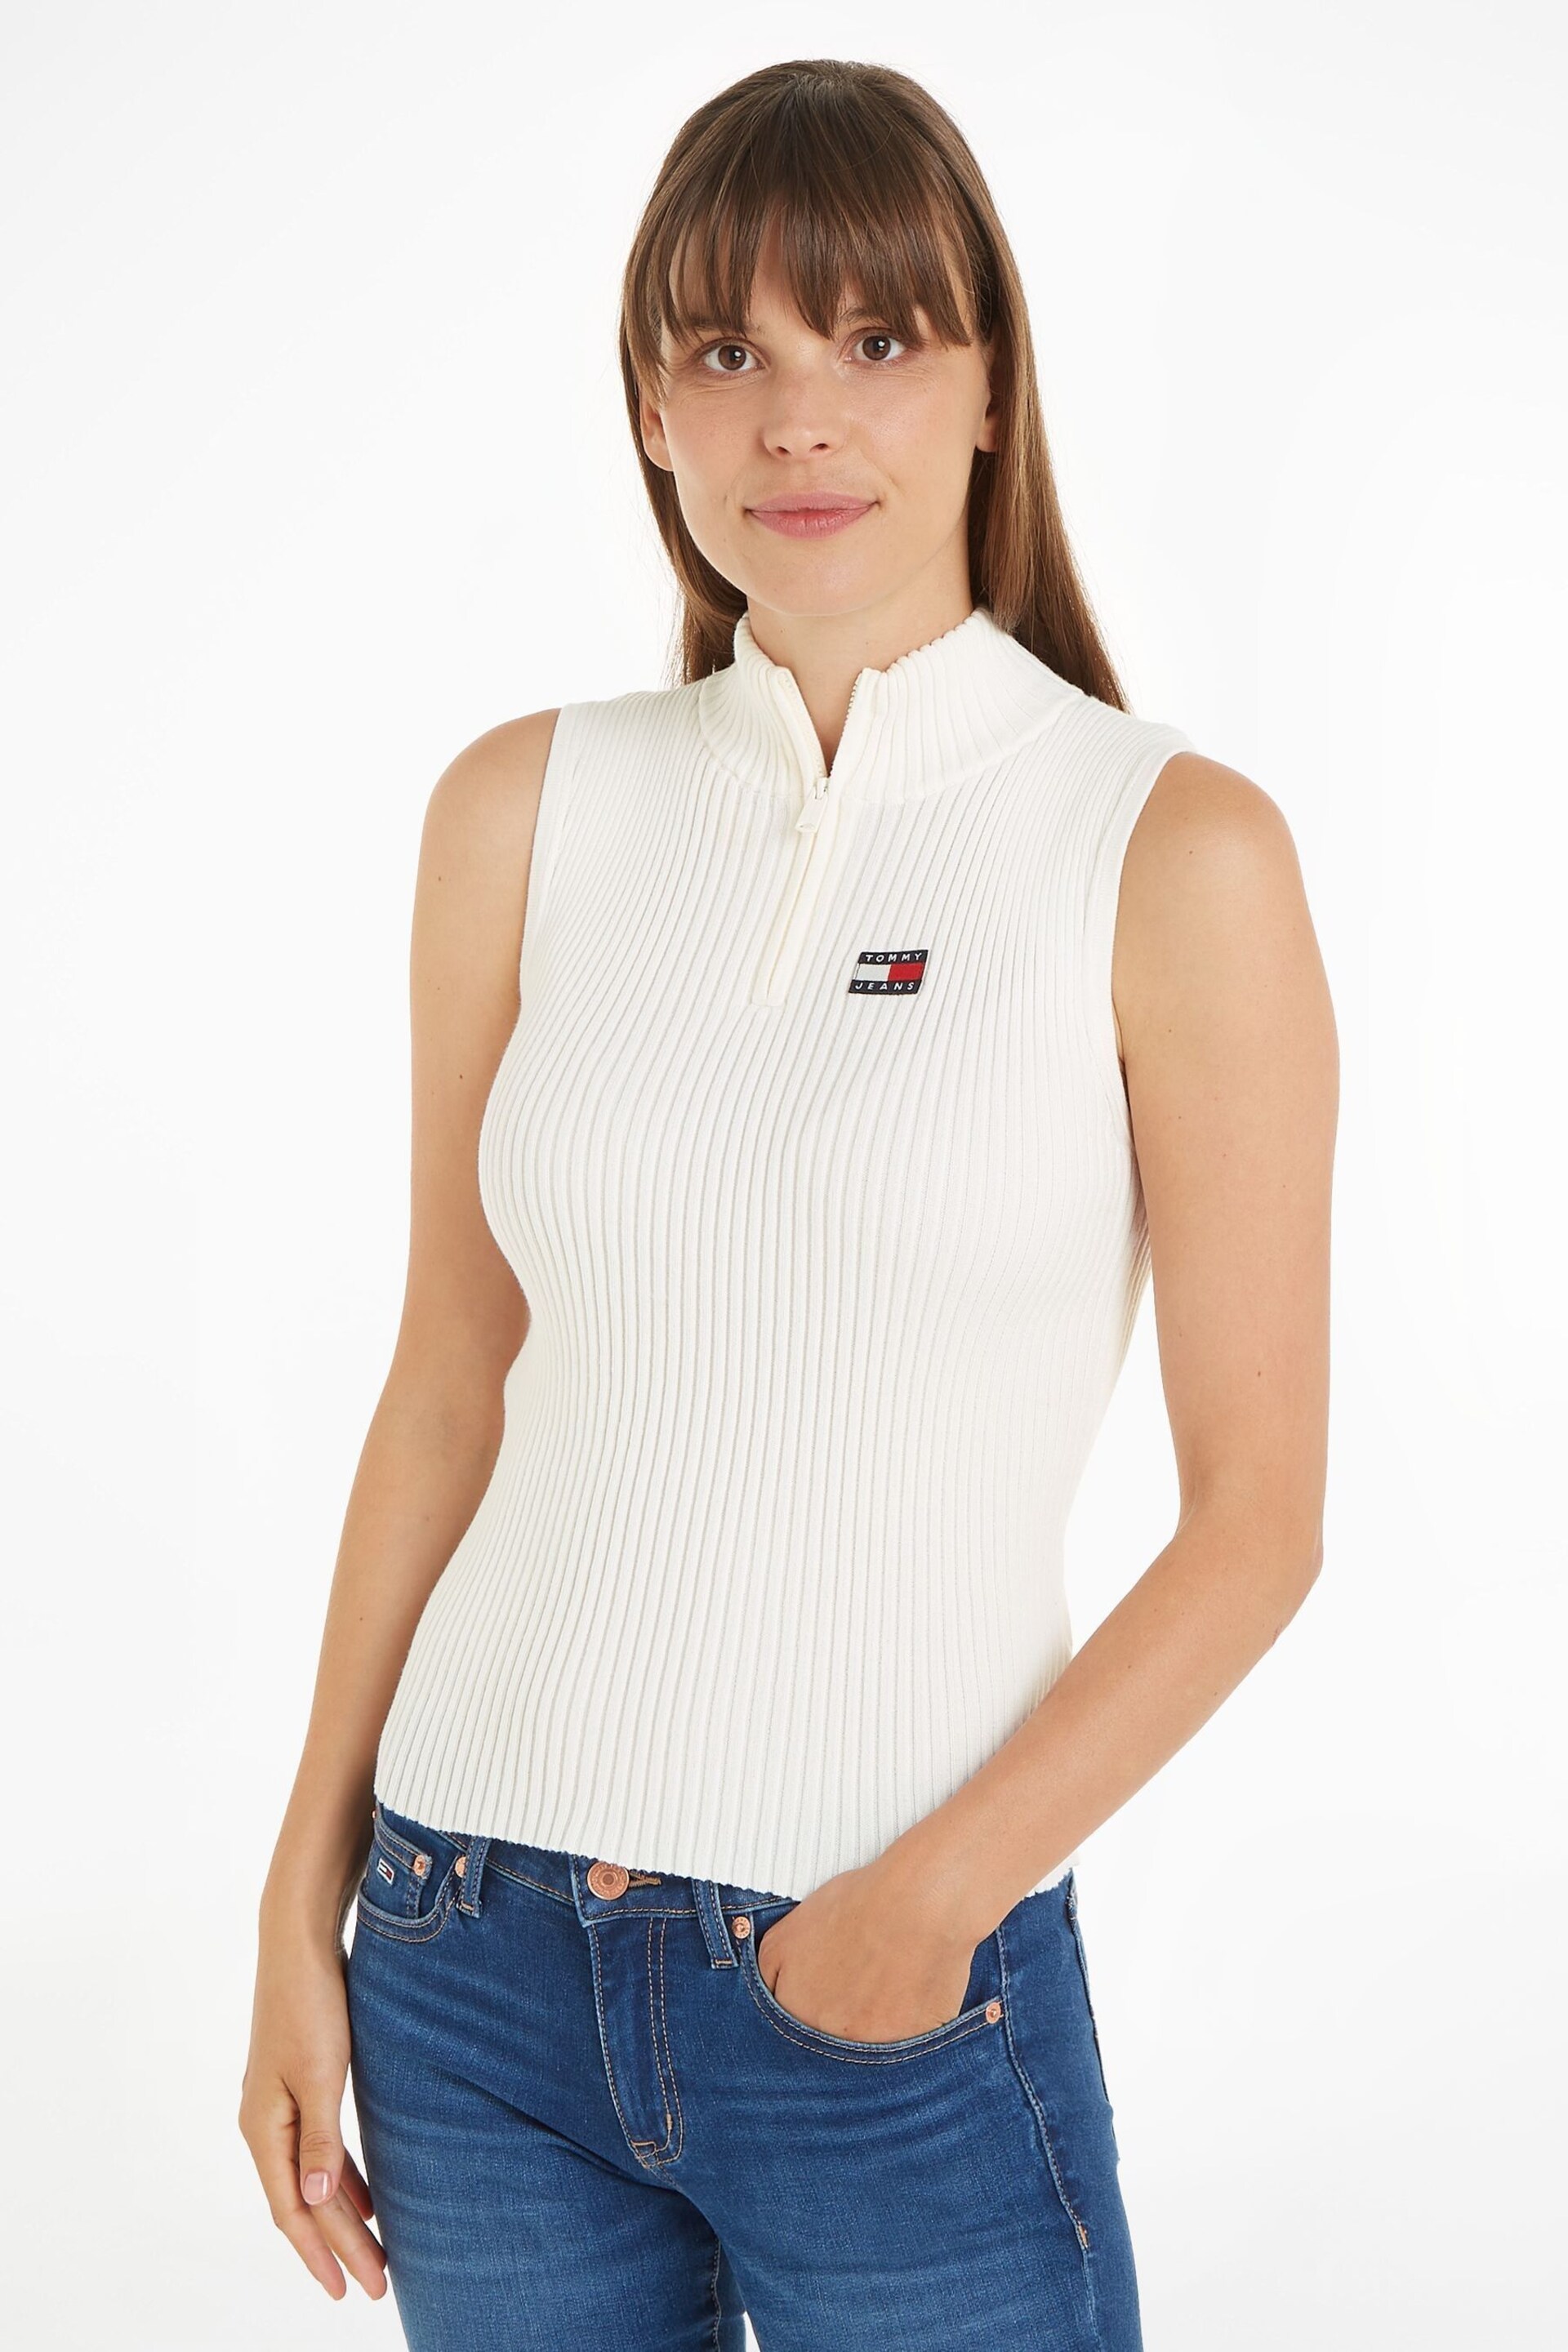 Tommy Jeans Zip Badge Sweater Vest - Image 1 of 6